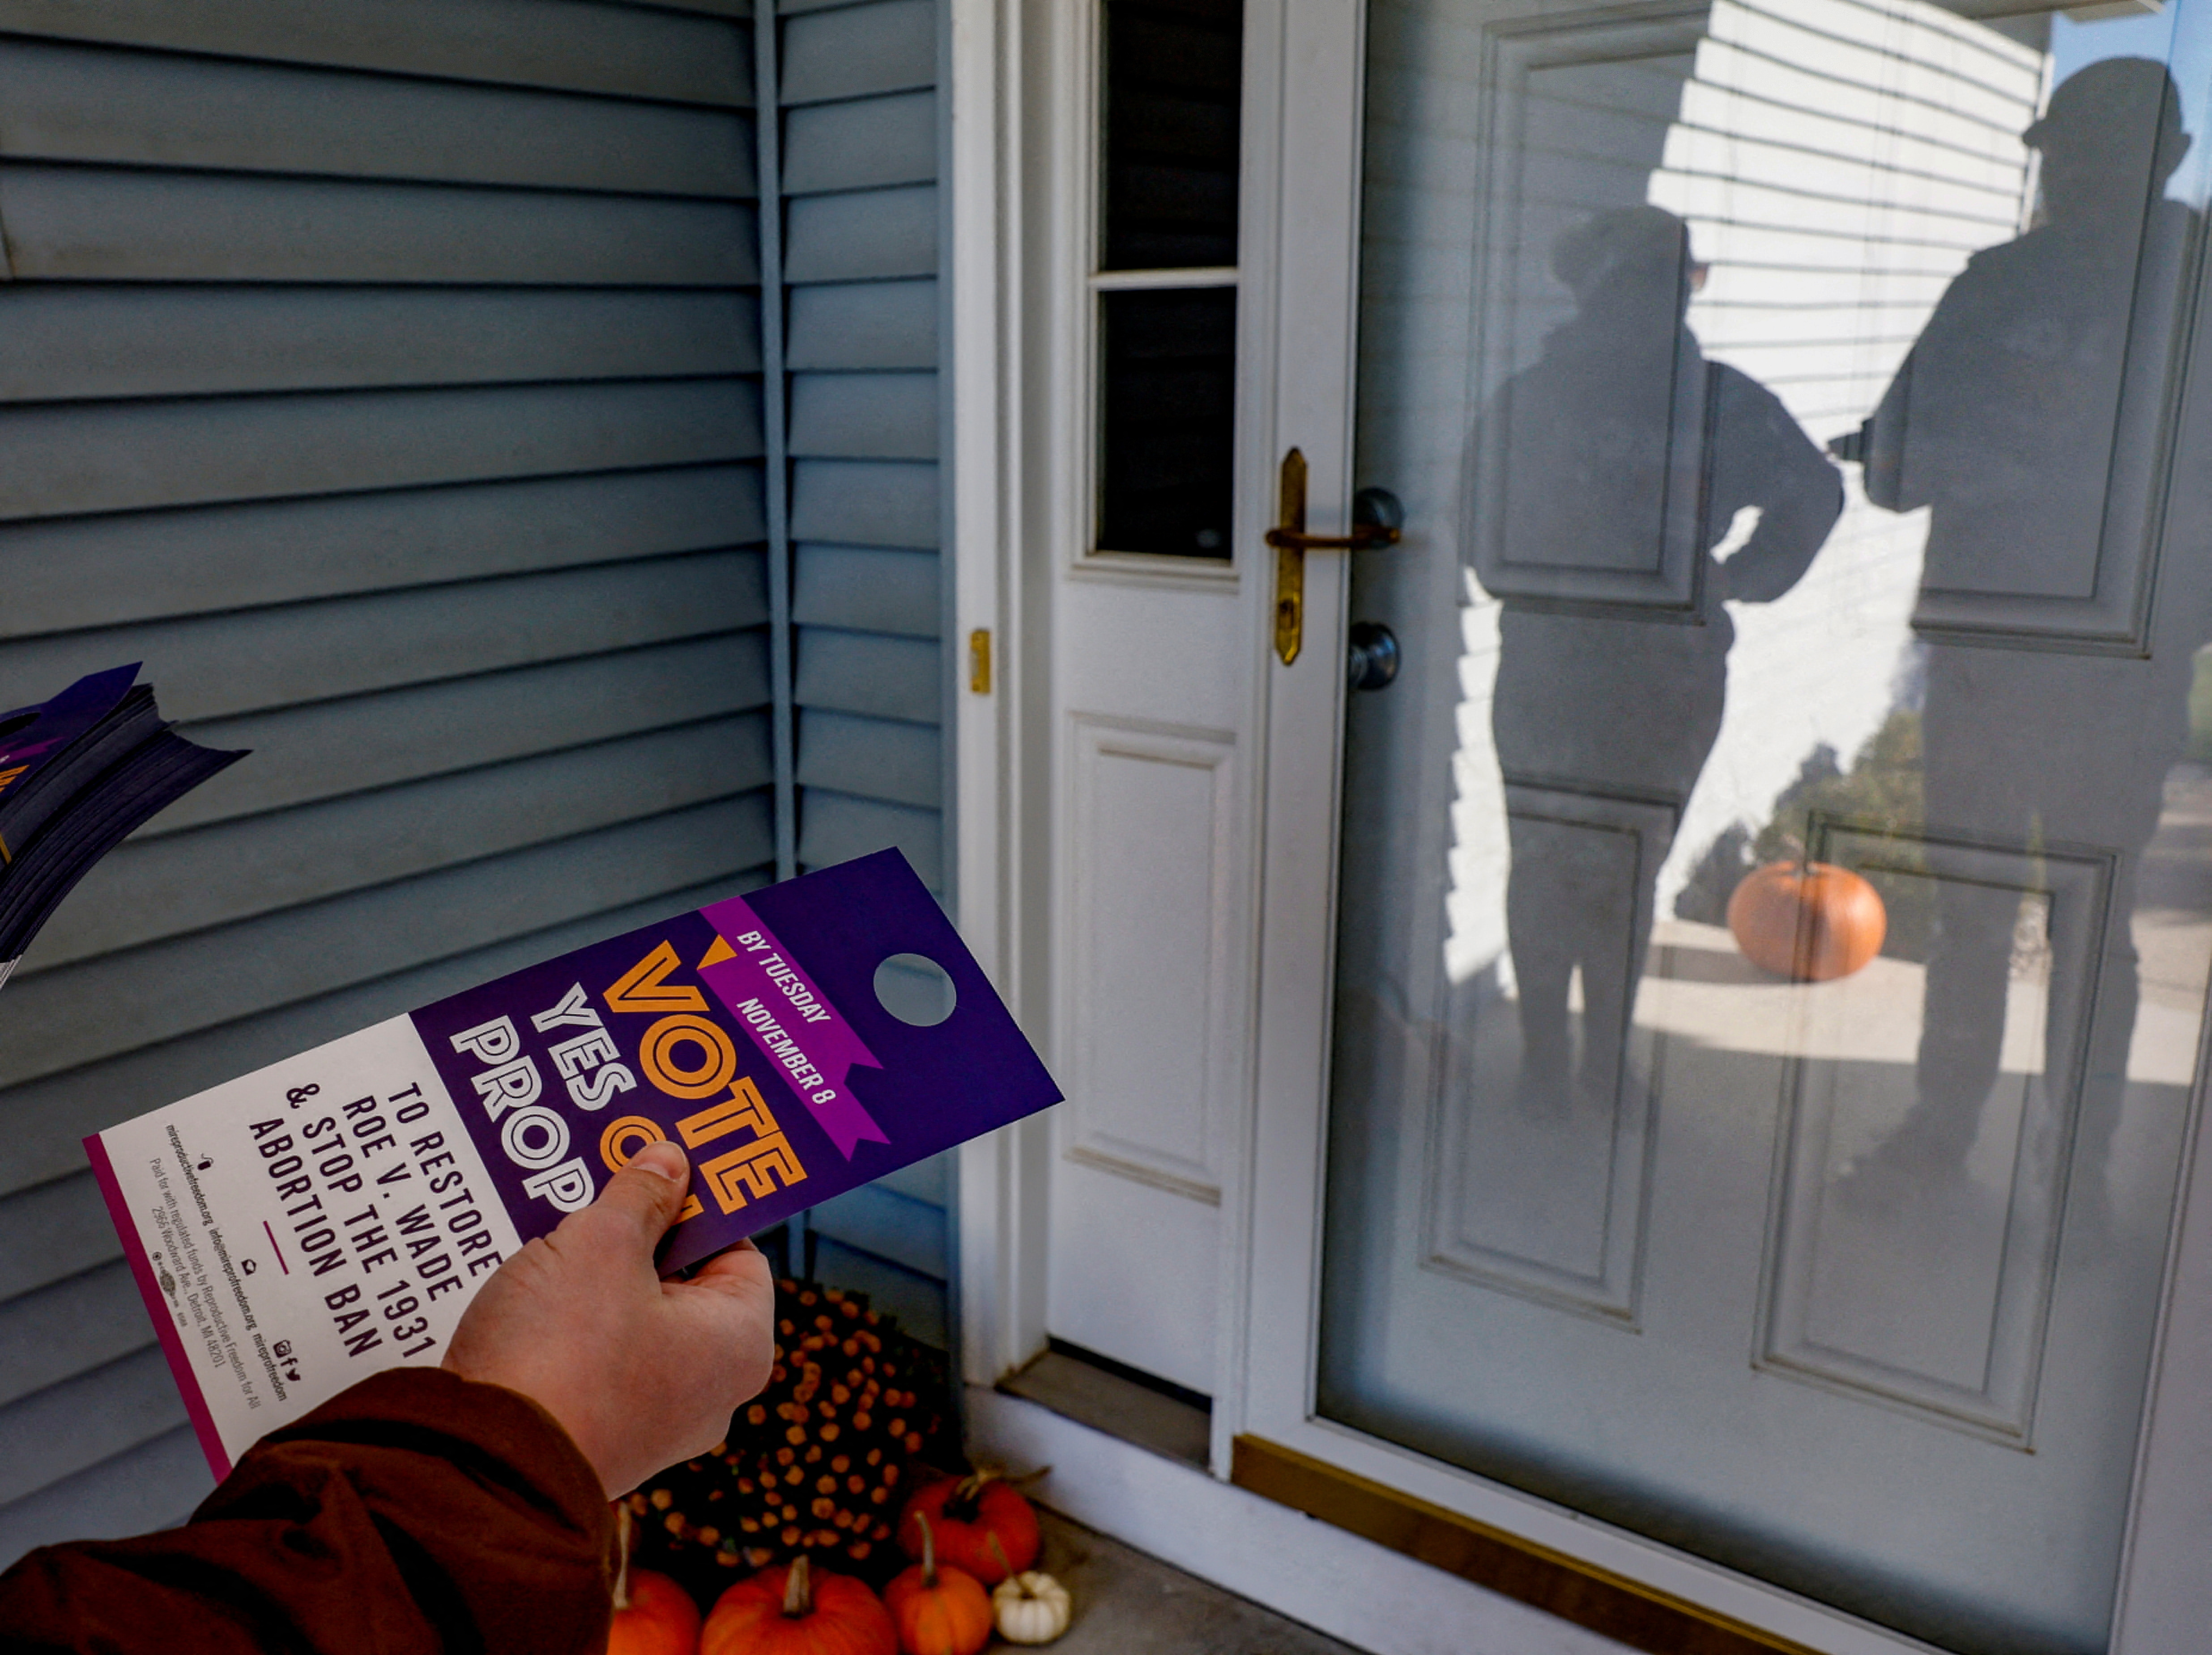 Canvassers in support of abortion rights knock on doors ahead of the midterm election in Michigan